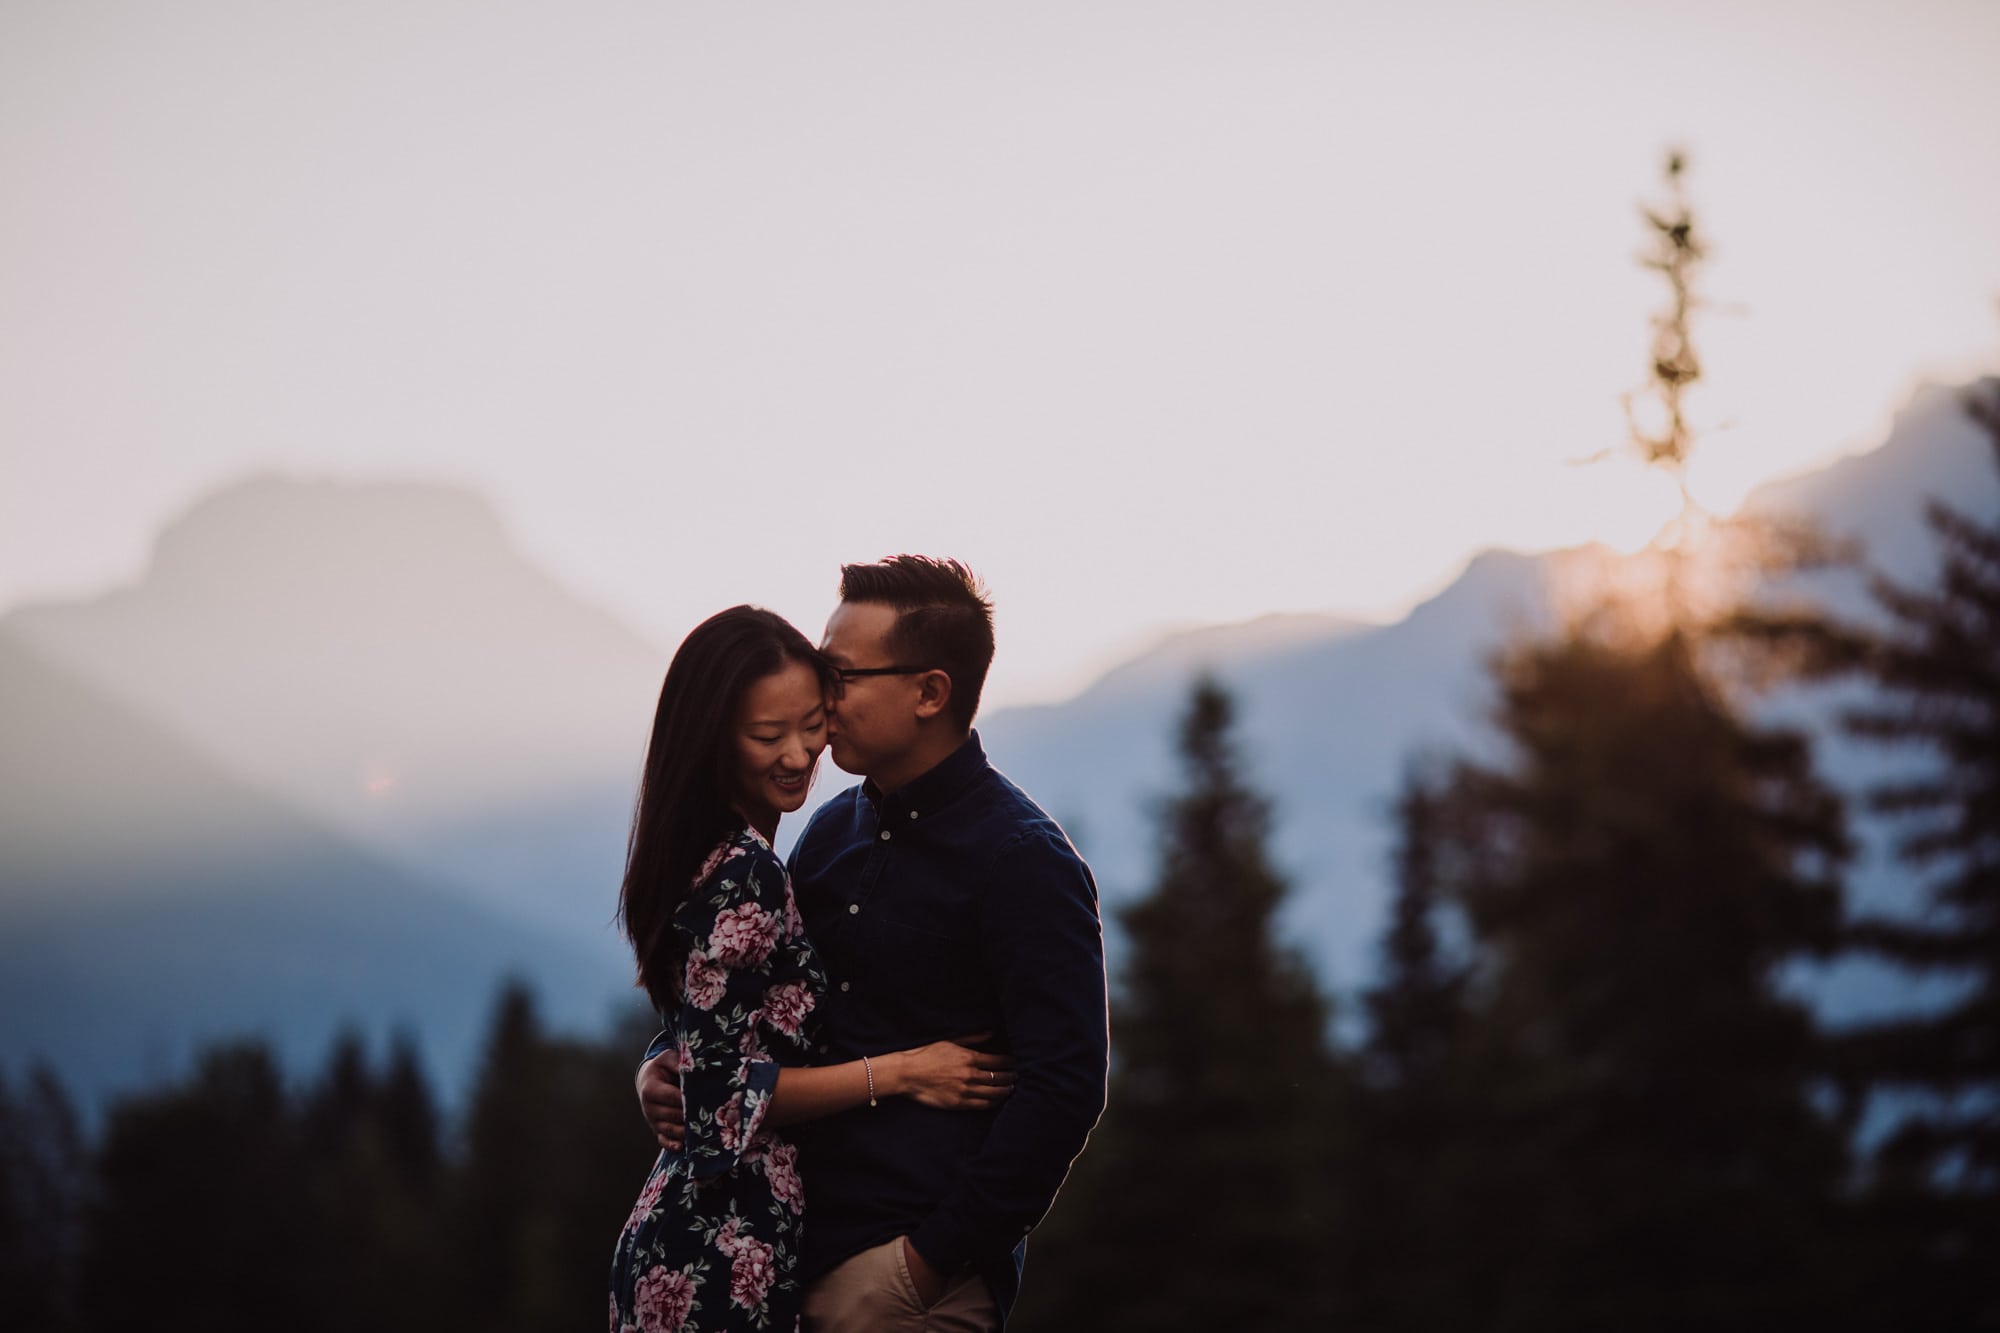 Banff Montreal Wedding Canmore Engagement Quarry Lake Montreal Traveling Destination Photographer Brent Calis Field Mountains Back Light Flare